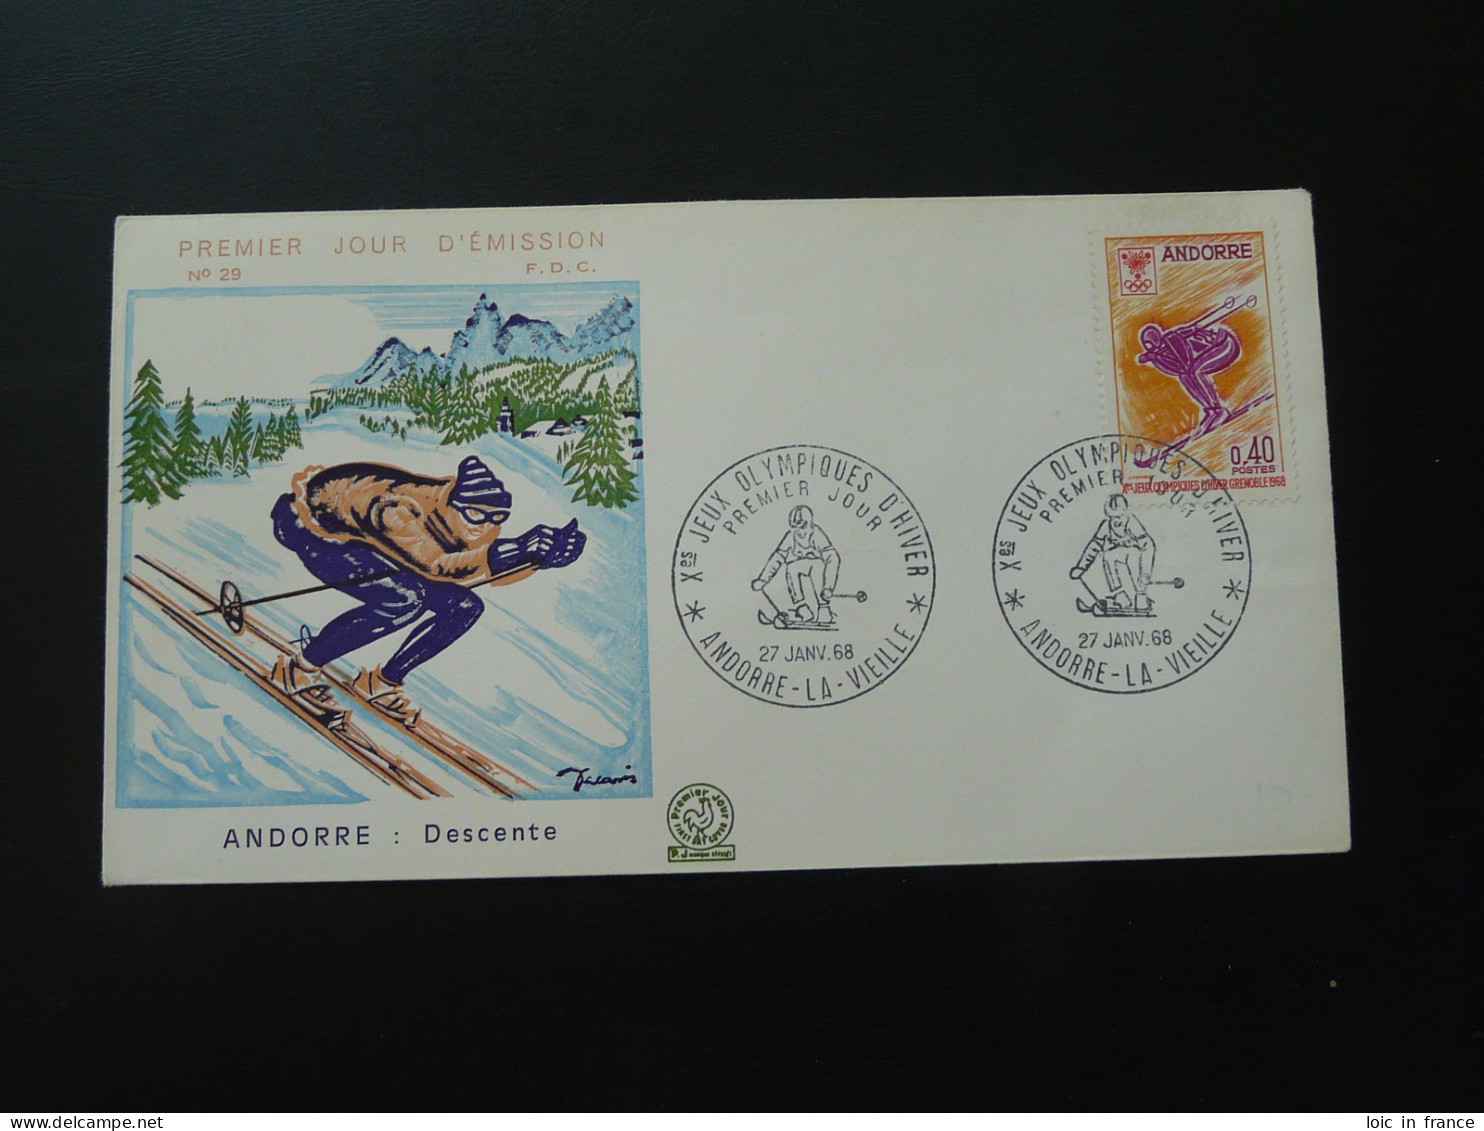 FDC Jeux Olympiques Grenoble Olympic Games Illustration De Decaris Andorre 1968 - Winter 1968: Grenoble